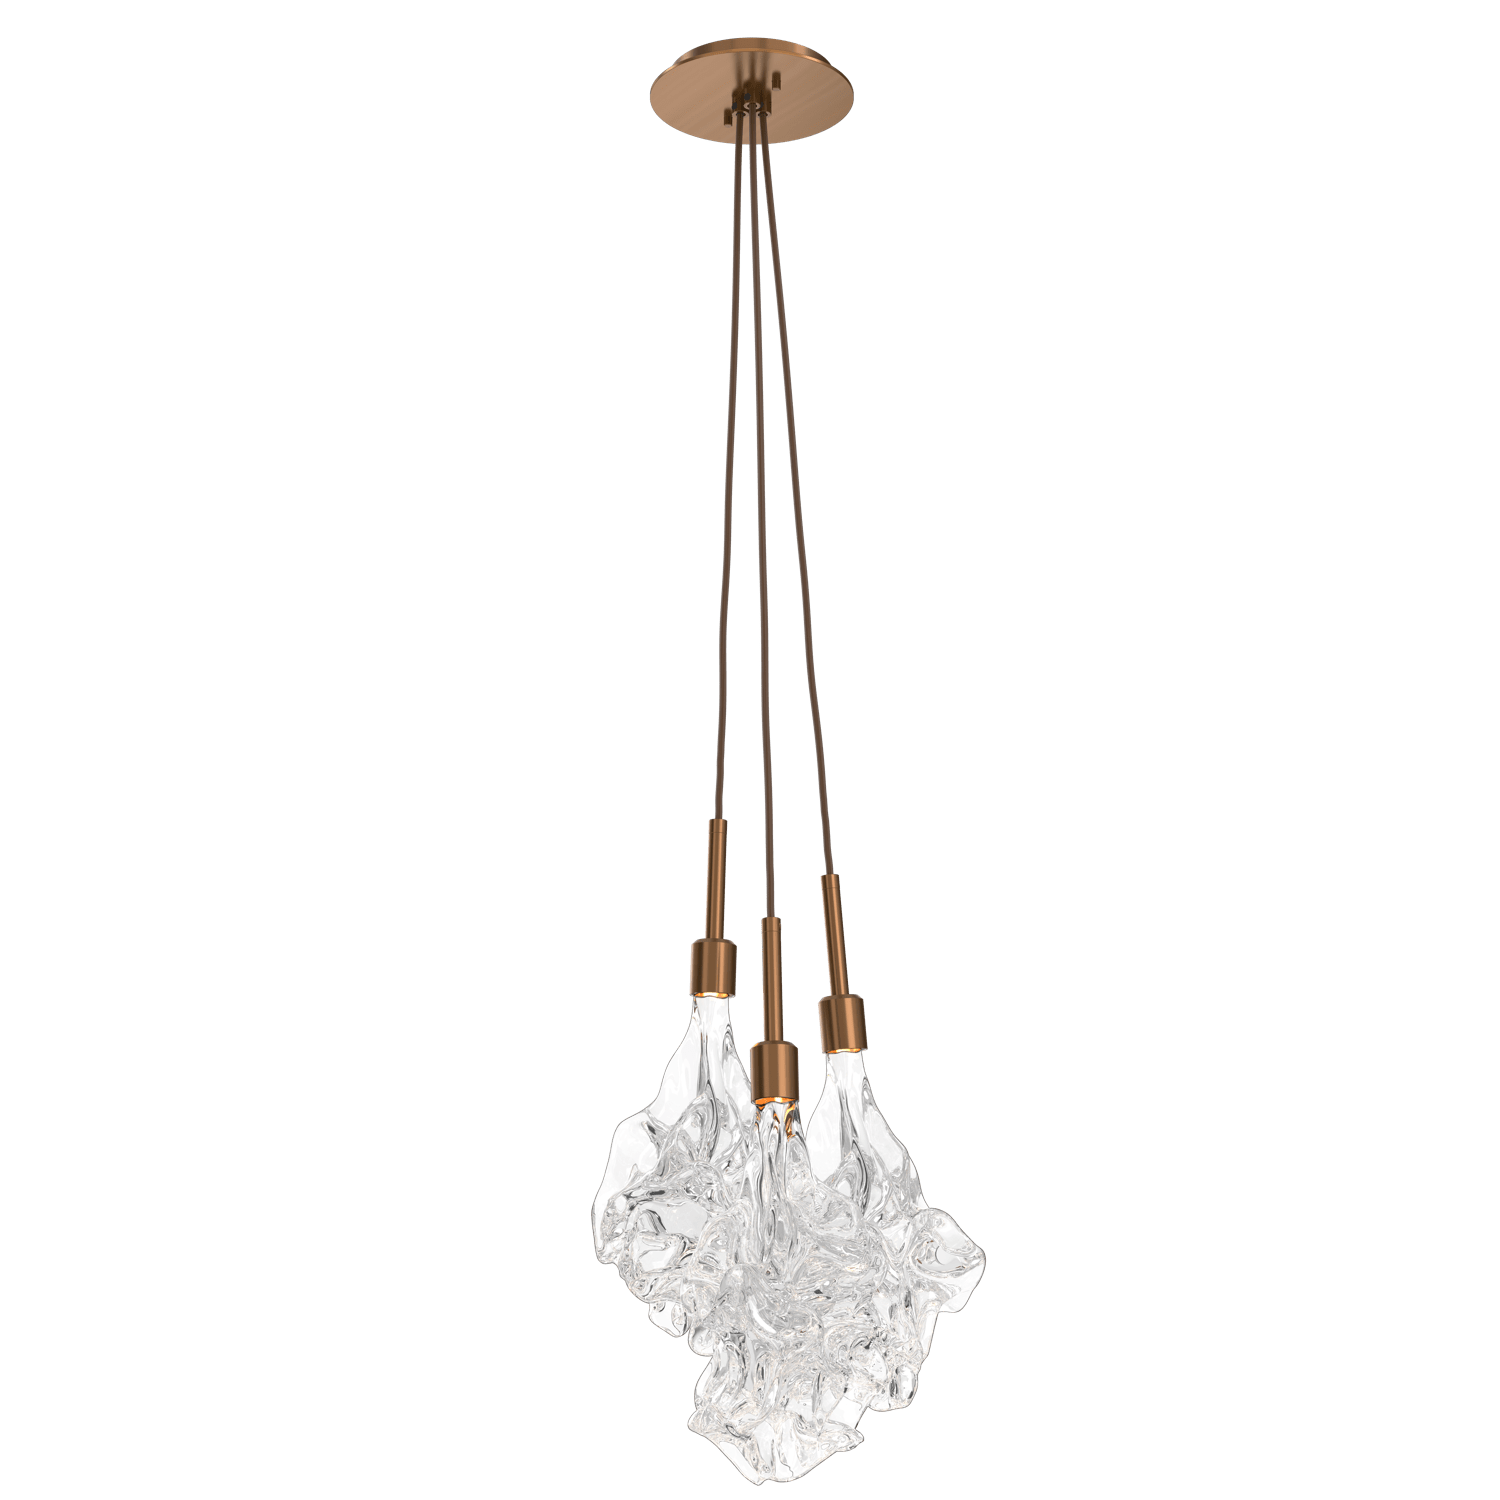 LAB0059-0A-RB-Hammerton-Studio-Blossom-3-light-cluster-pendant-light-with-oil-rubbed-bronze-finish-and-clear-handblown-crystal-glass-shades-and-LED-lamping